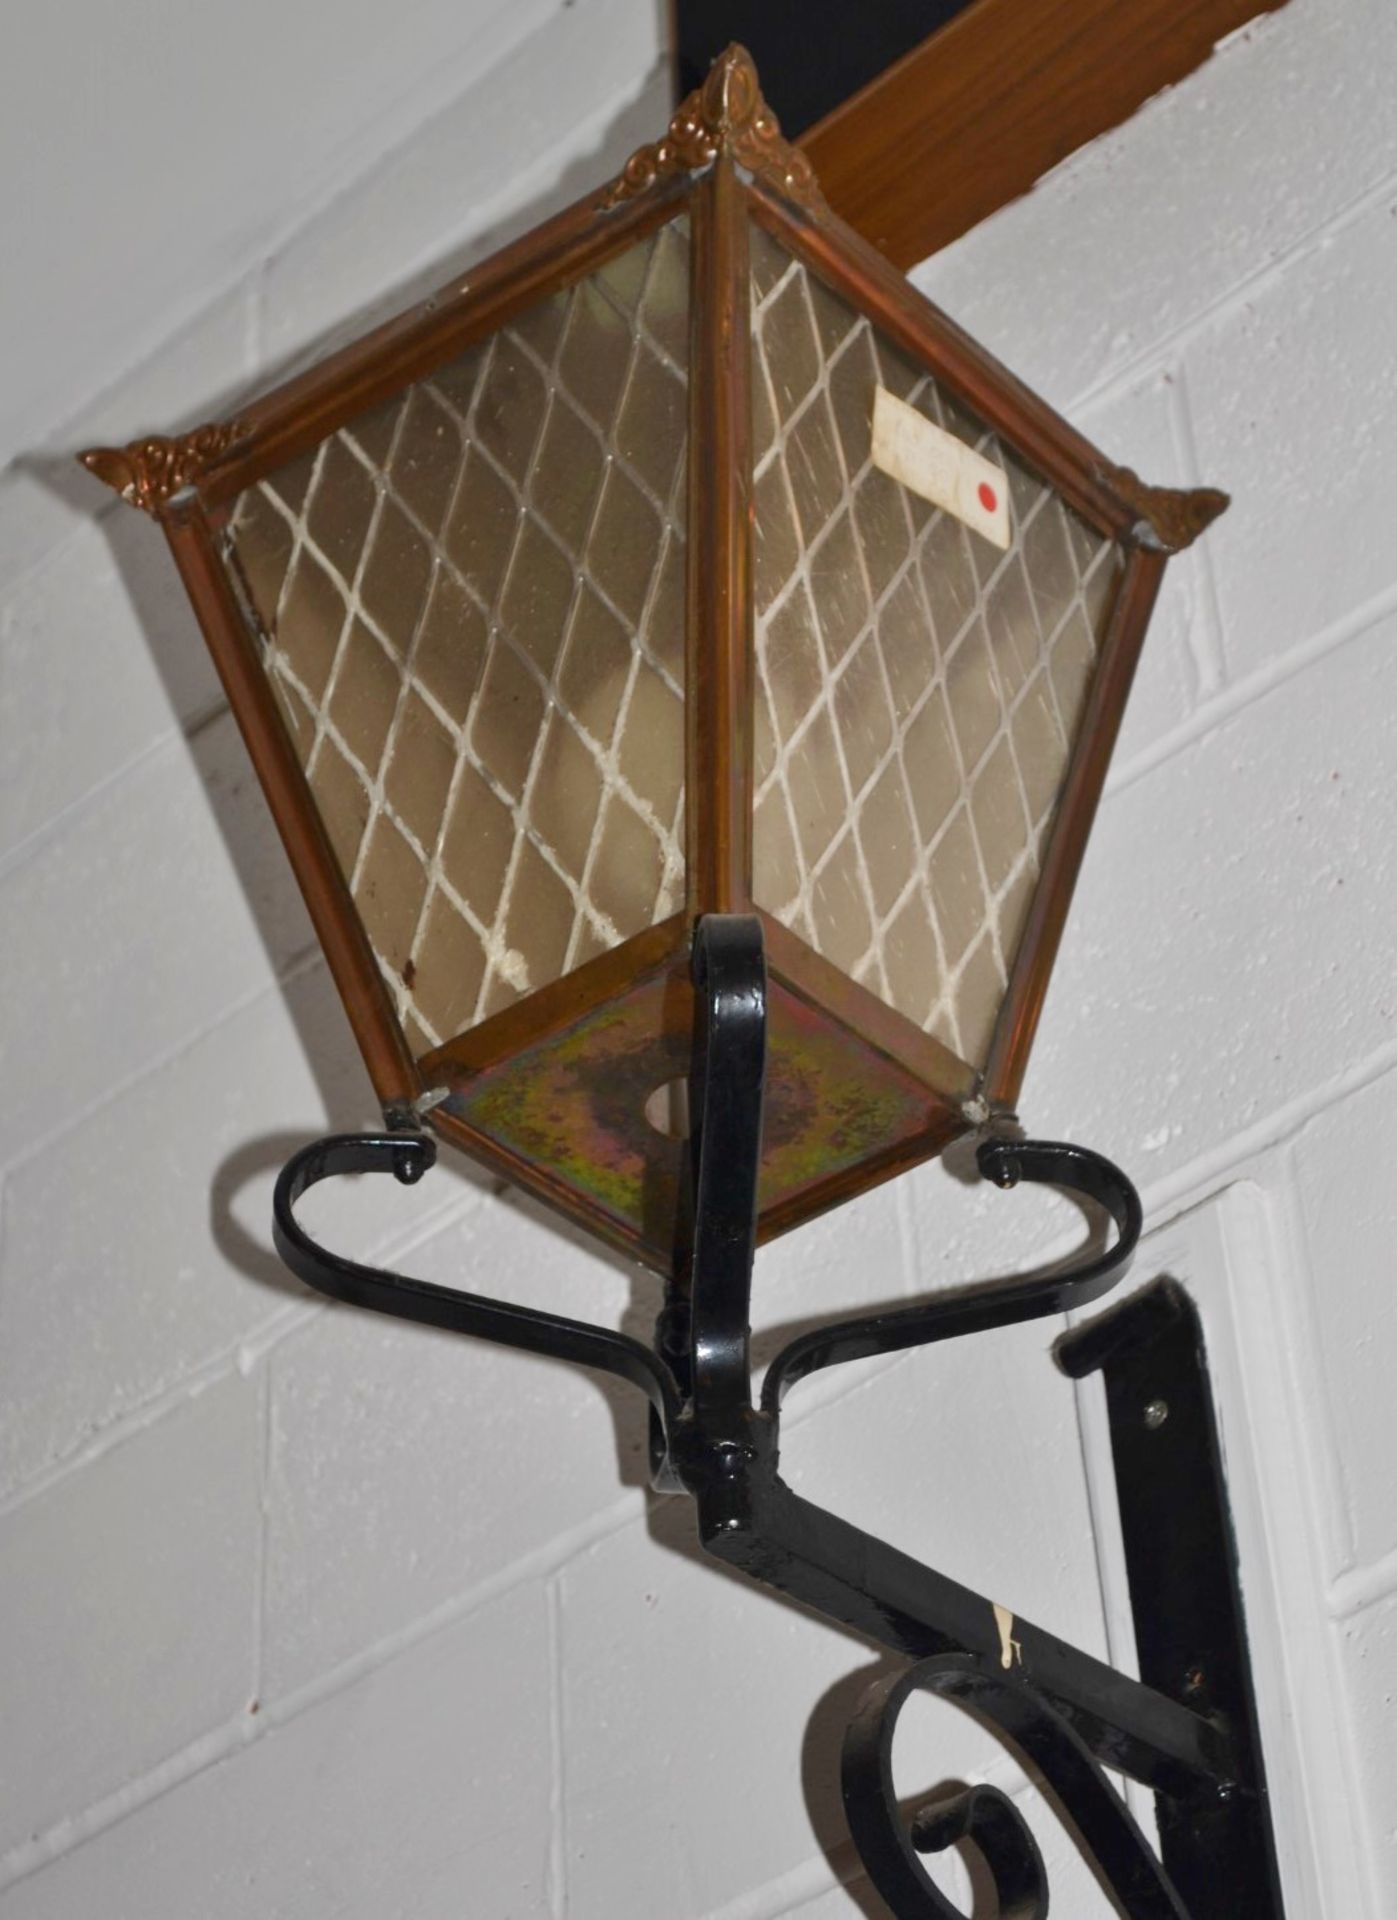 1 x Victorian Style Wall Lantern Light Fitting - Large Size in Black and Copper - Overal Height - Image 4 of 4